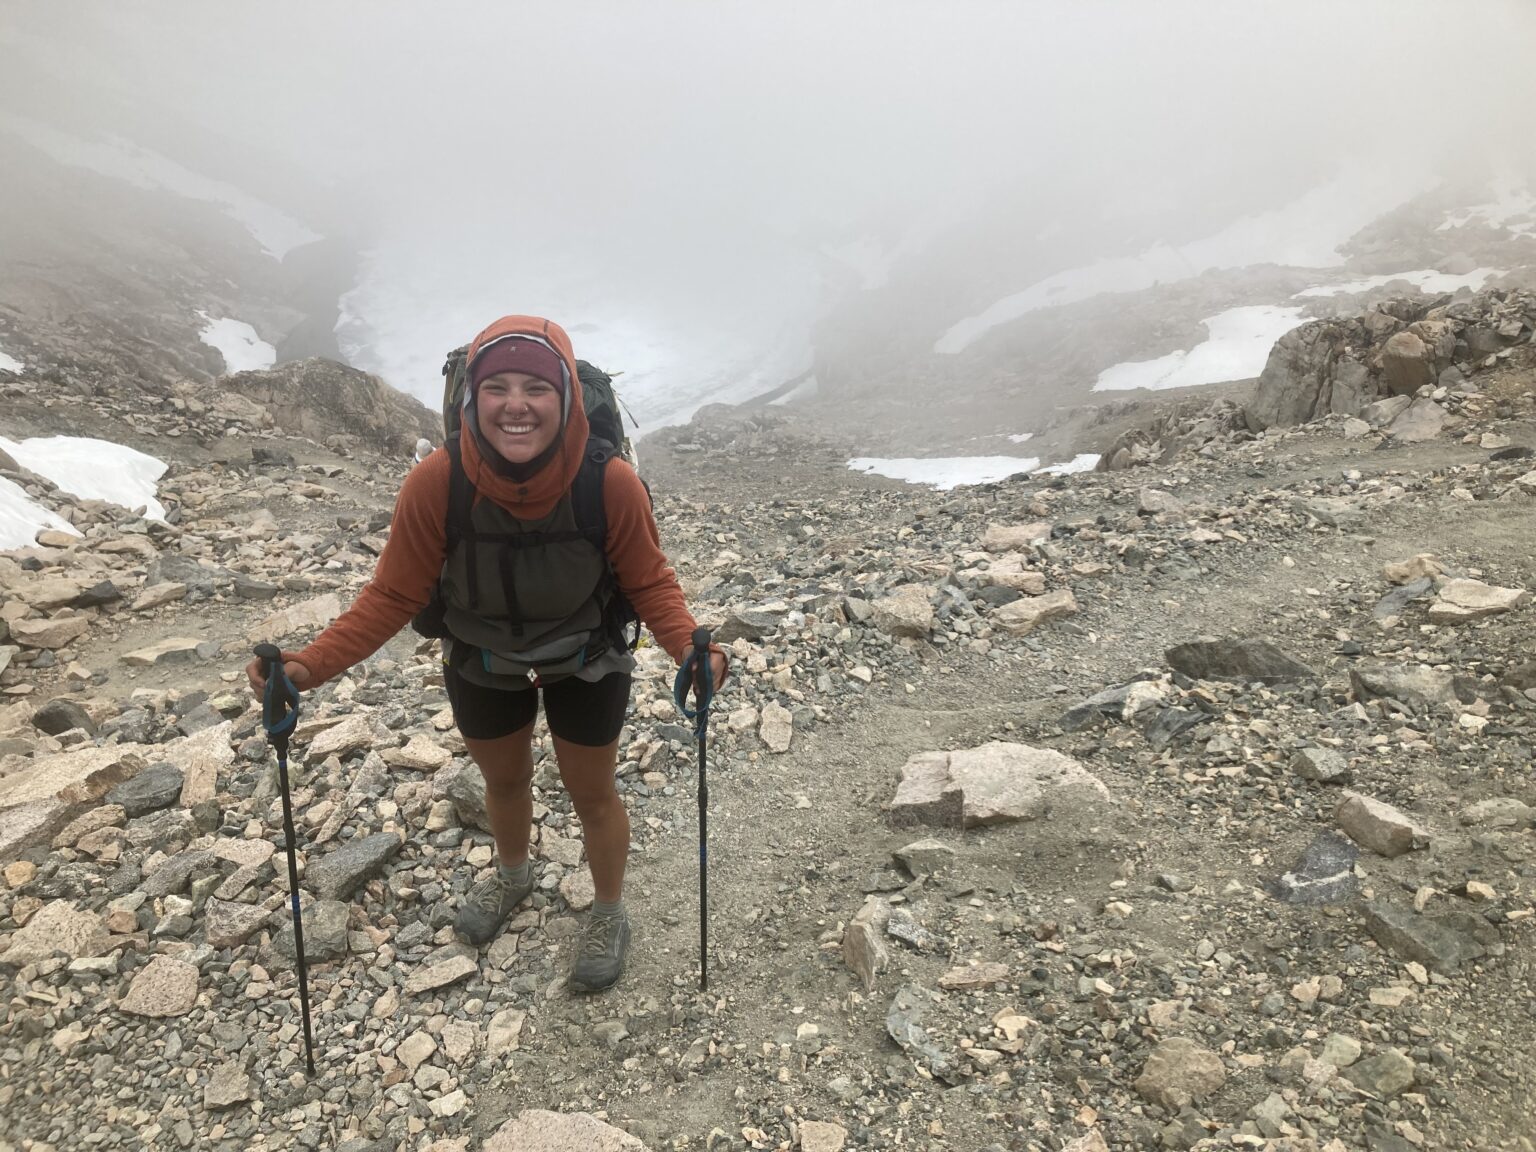 An unnamed hiker took a photo of Willow Gebhard